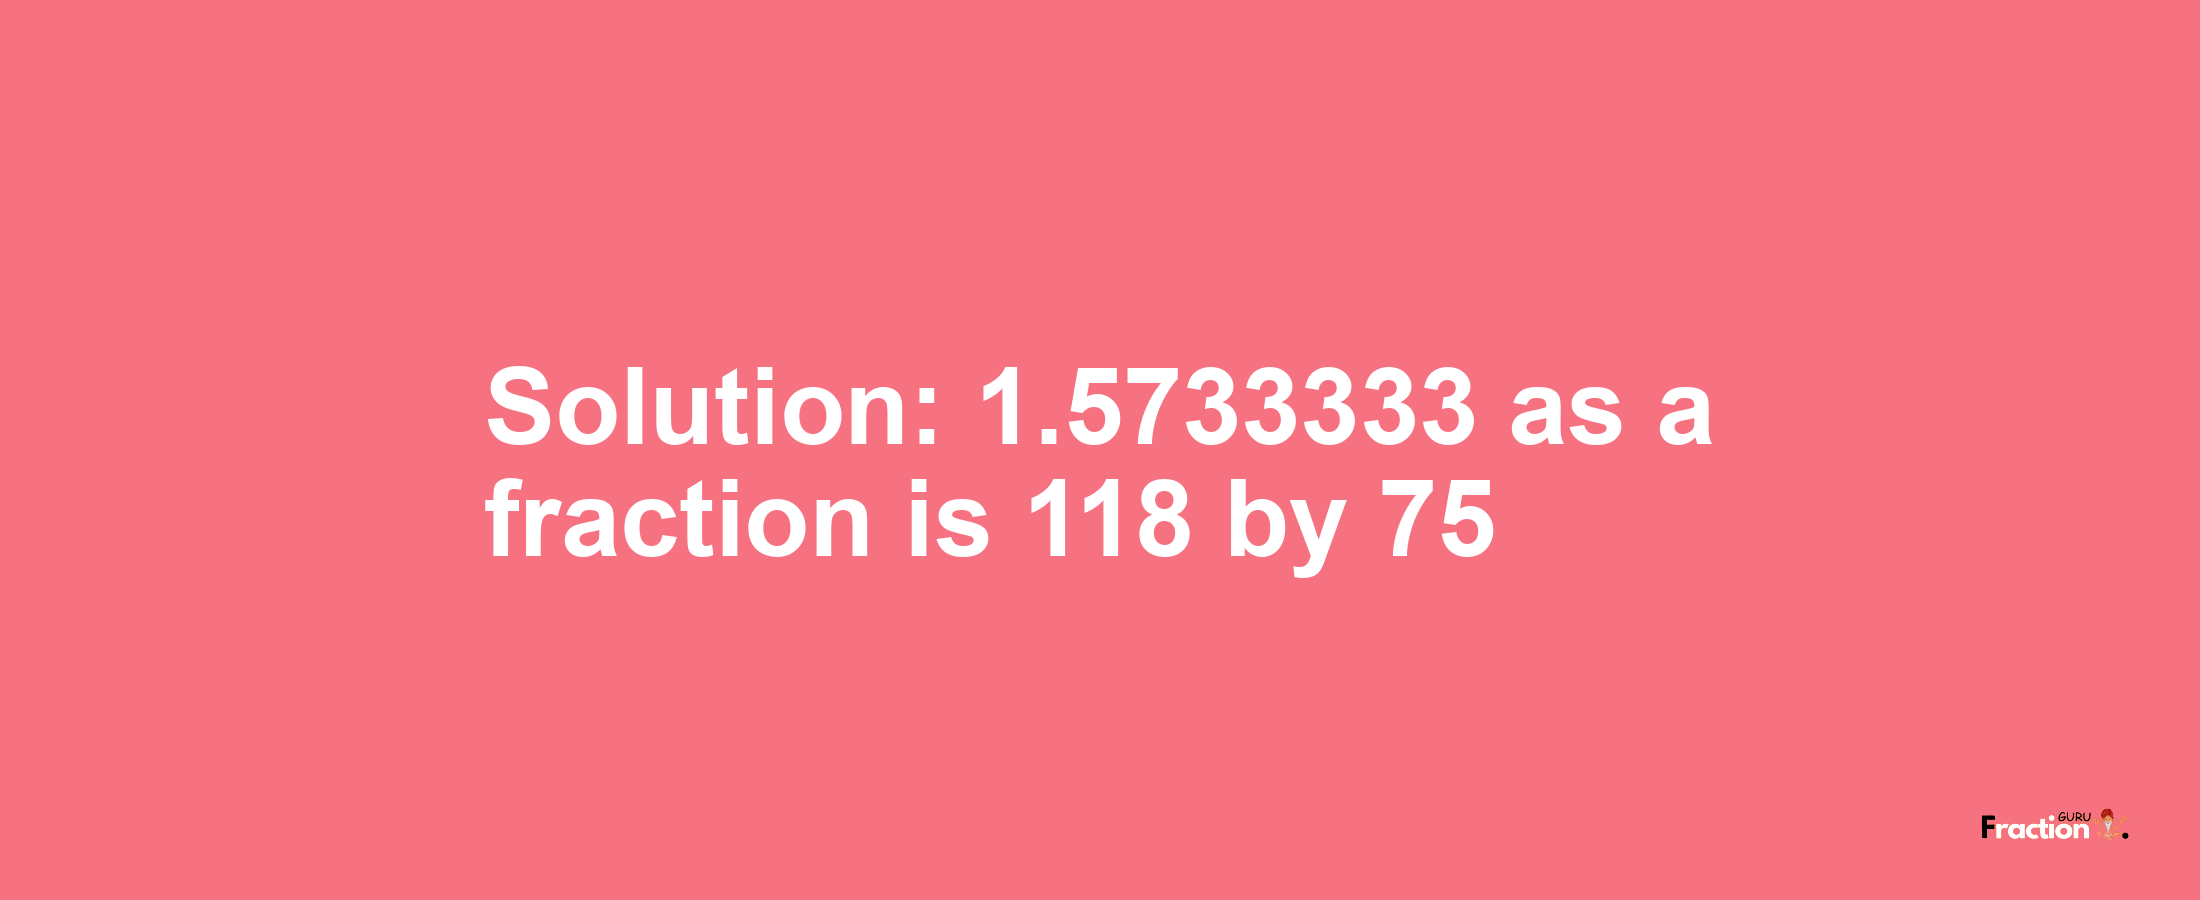 Solution:1.5733333 as a fraction is 118/75